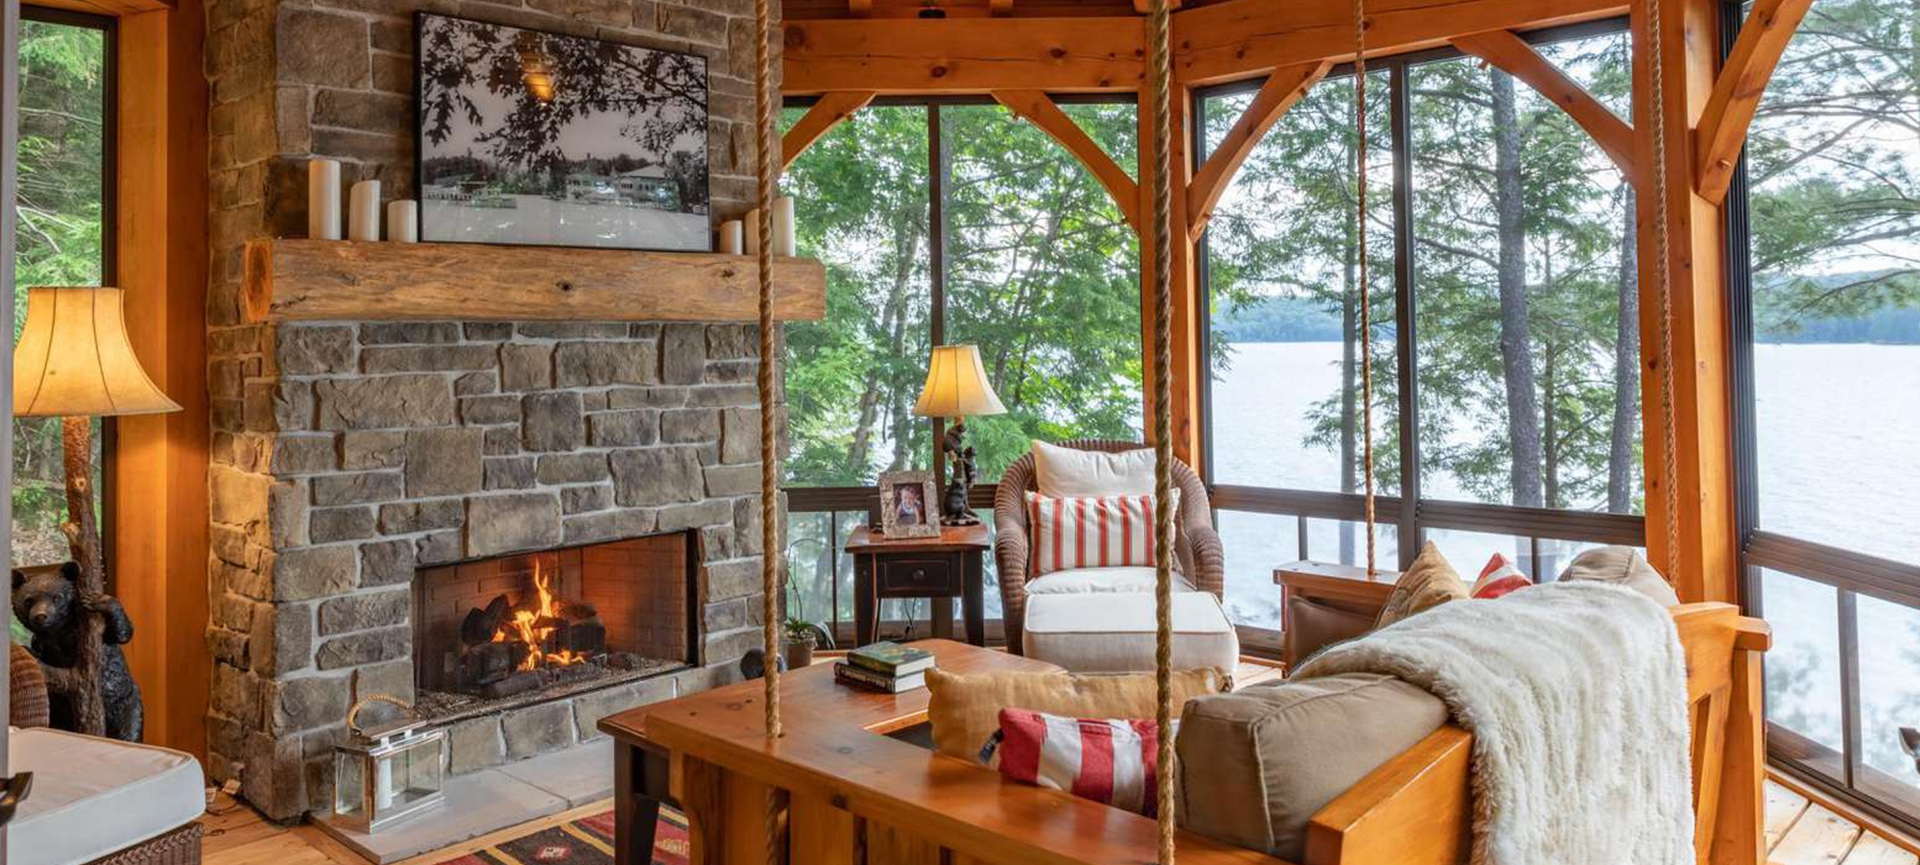 Primrose Property in Huntsville - Jayne's Luxurious Rentals | Cozy lakeside living room with stone fireplace and panoramic views